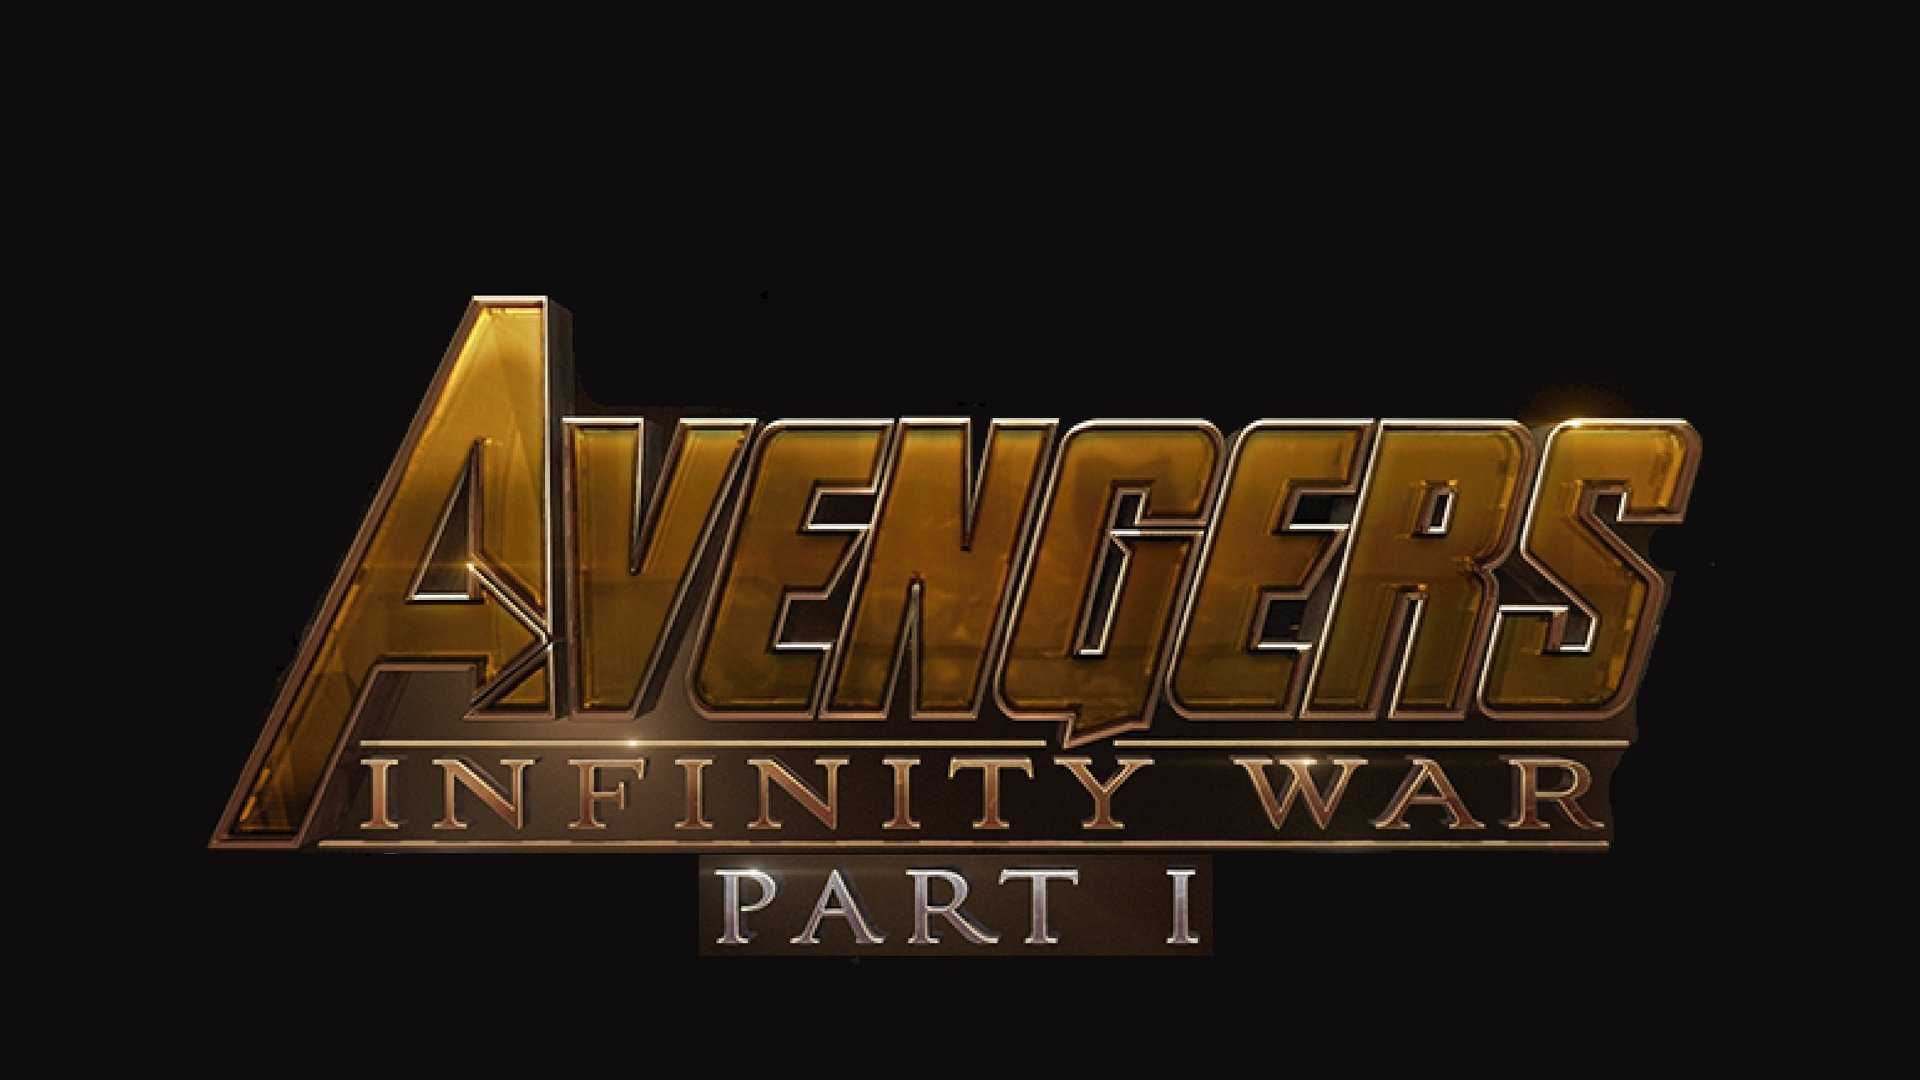 for ipod download Avengers: Infinity War